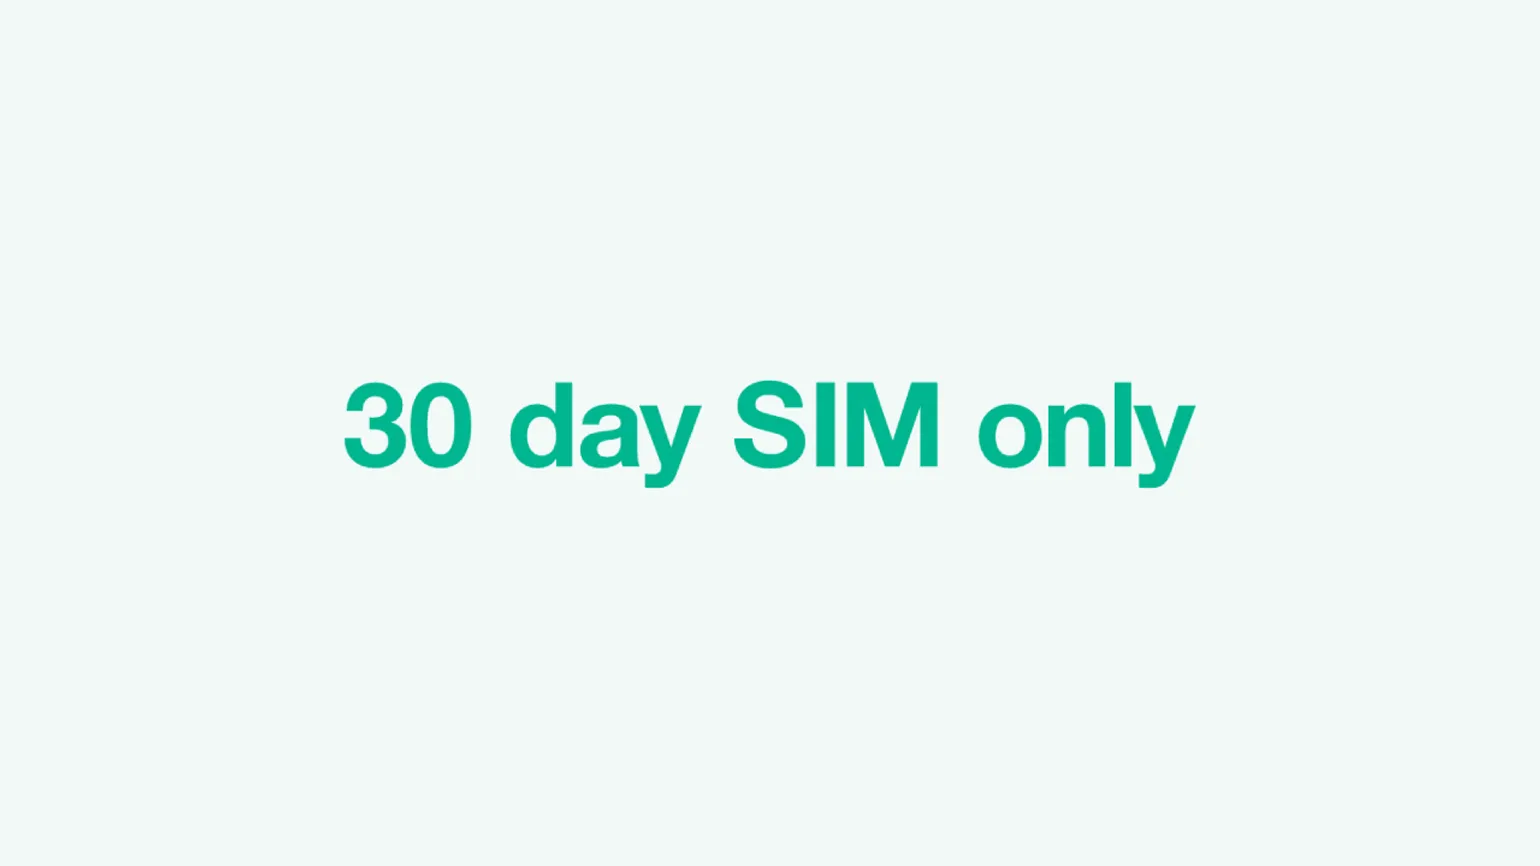 30 day SIM only plans have replaced pay as you go